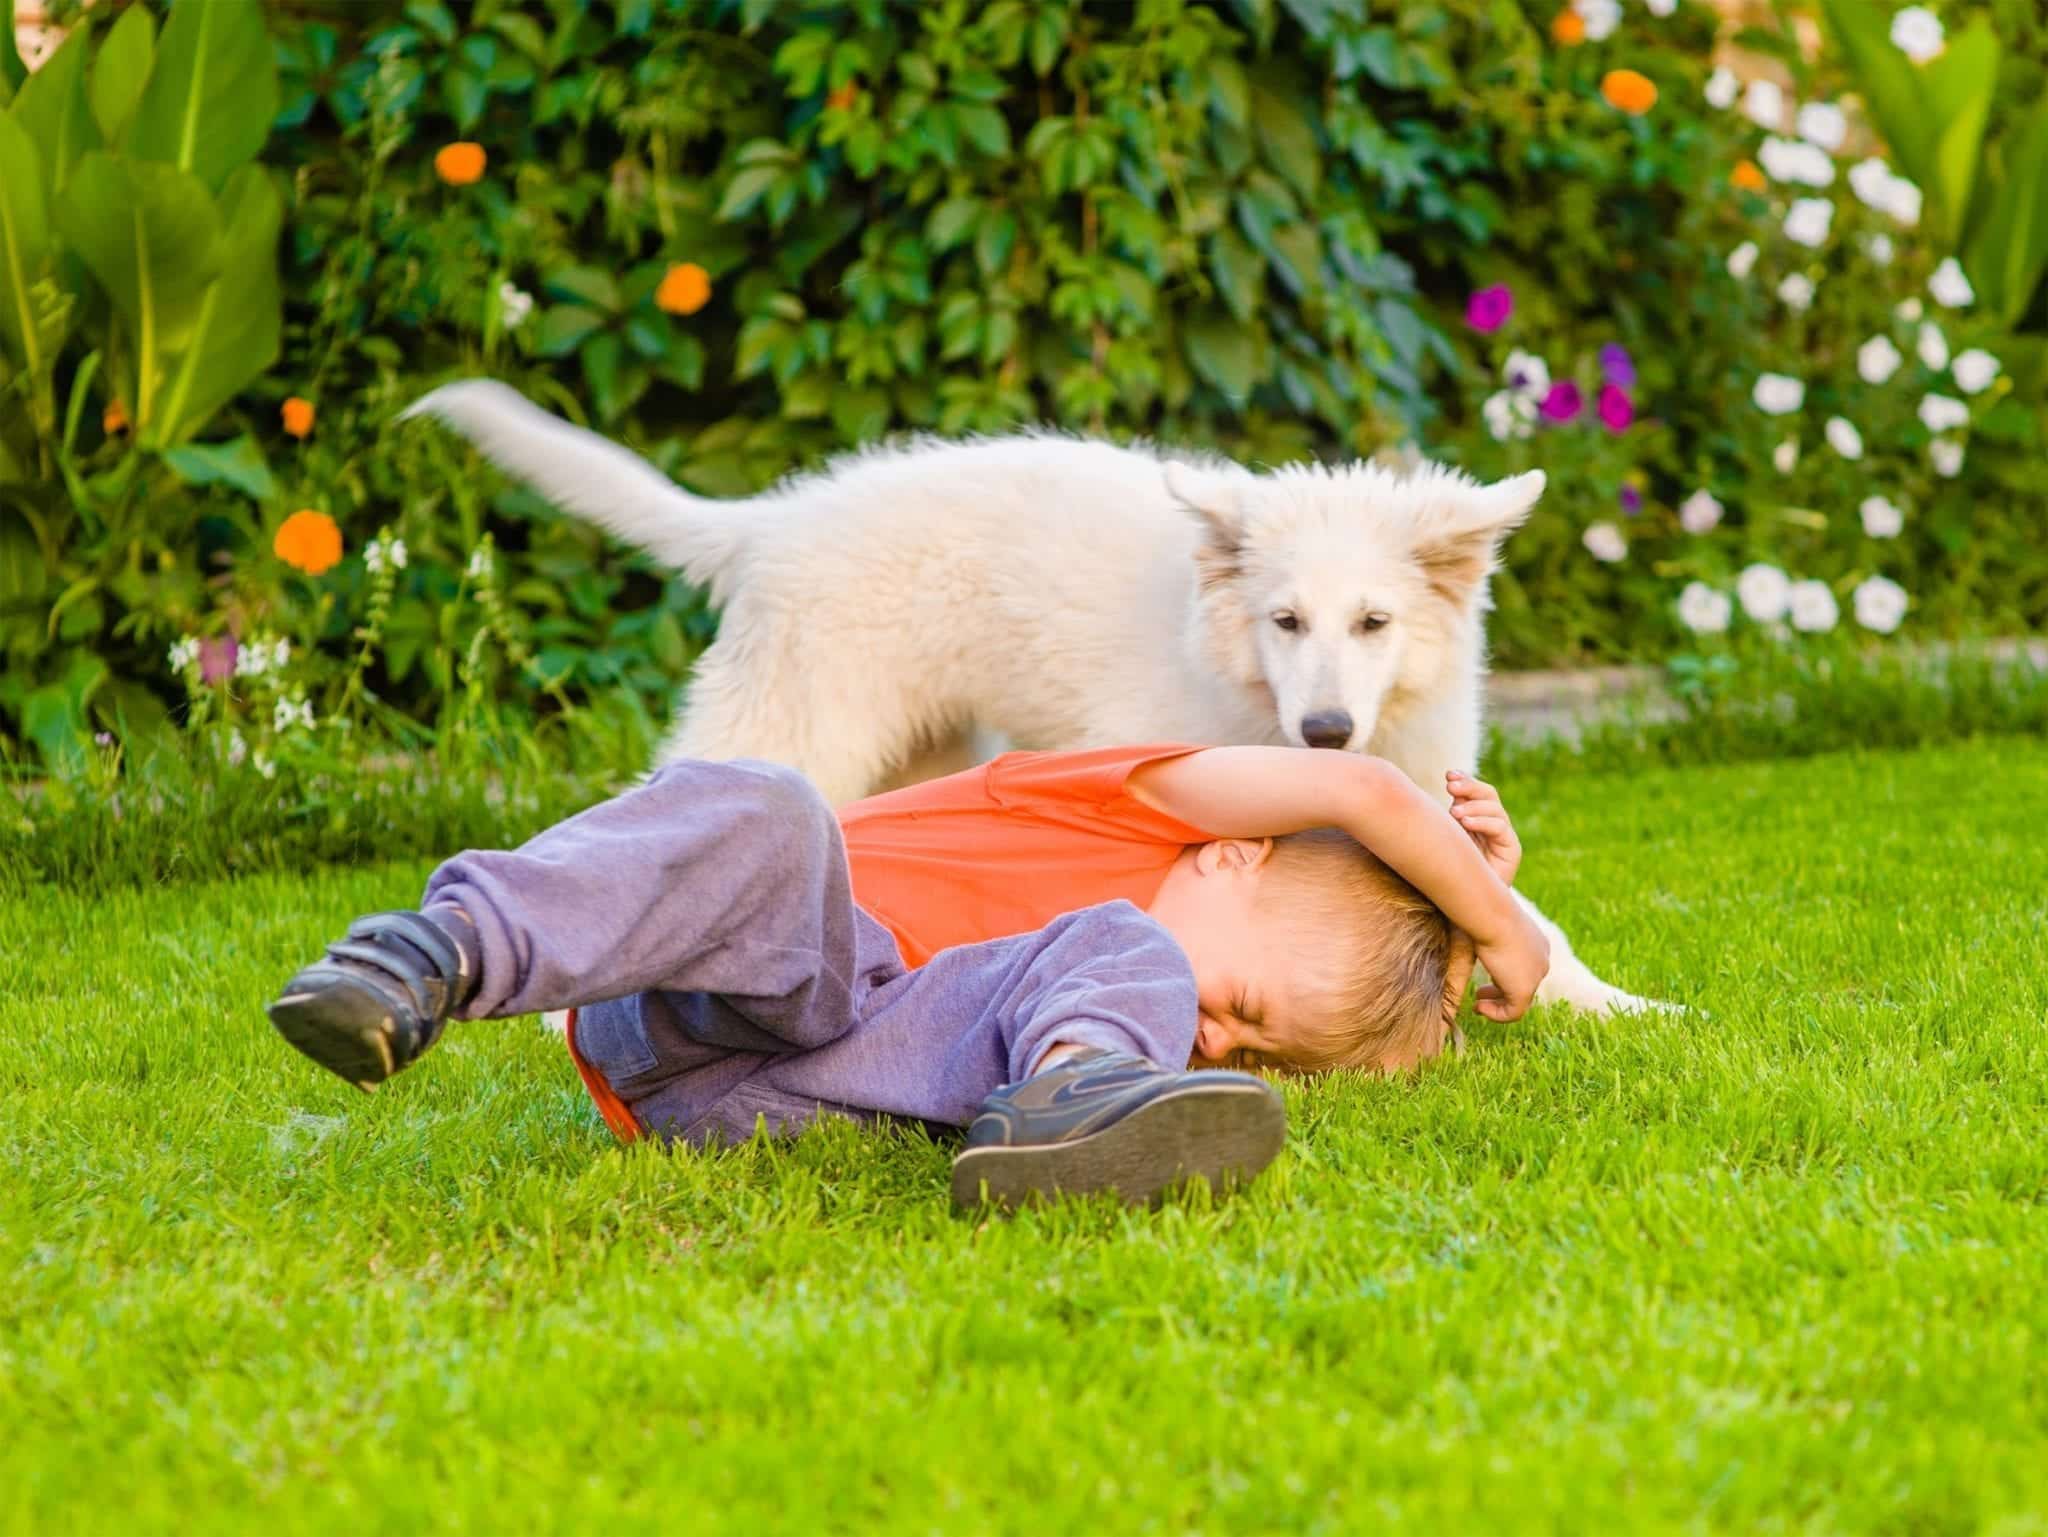 If Your Child Is Attacked By a Dog or Wild Animal